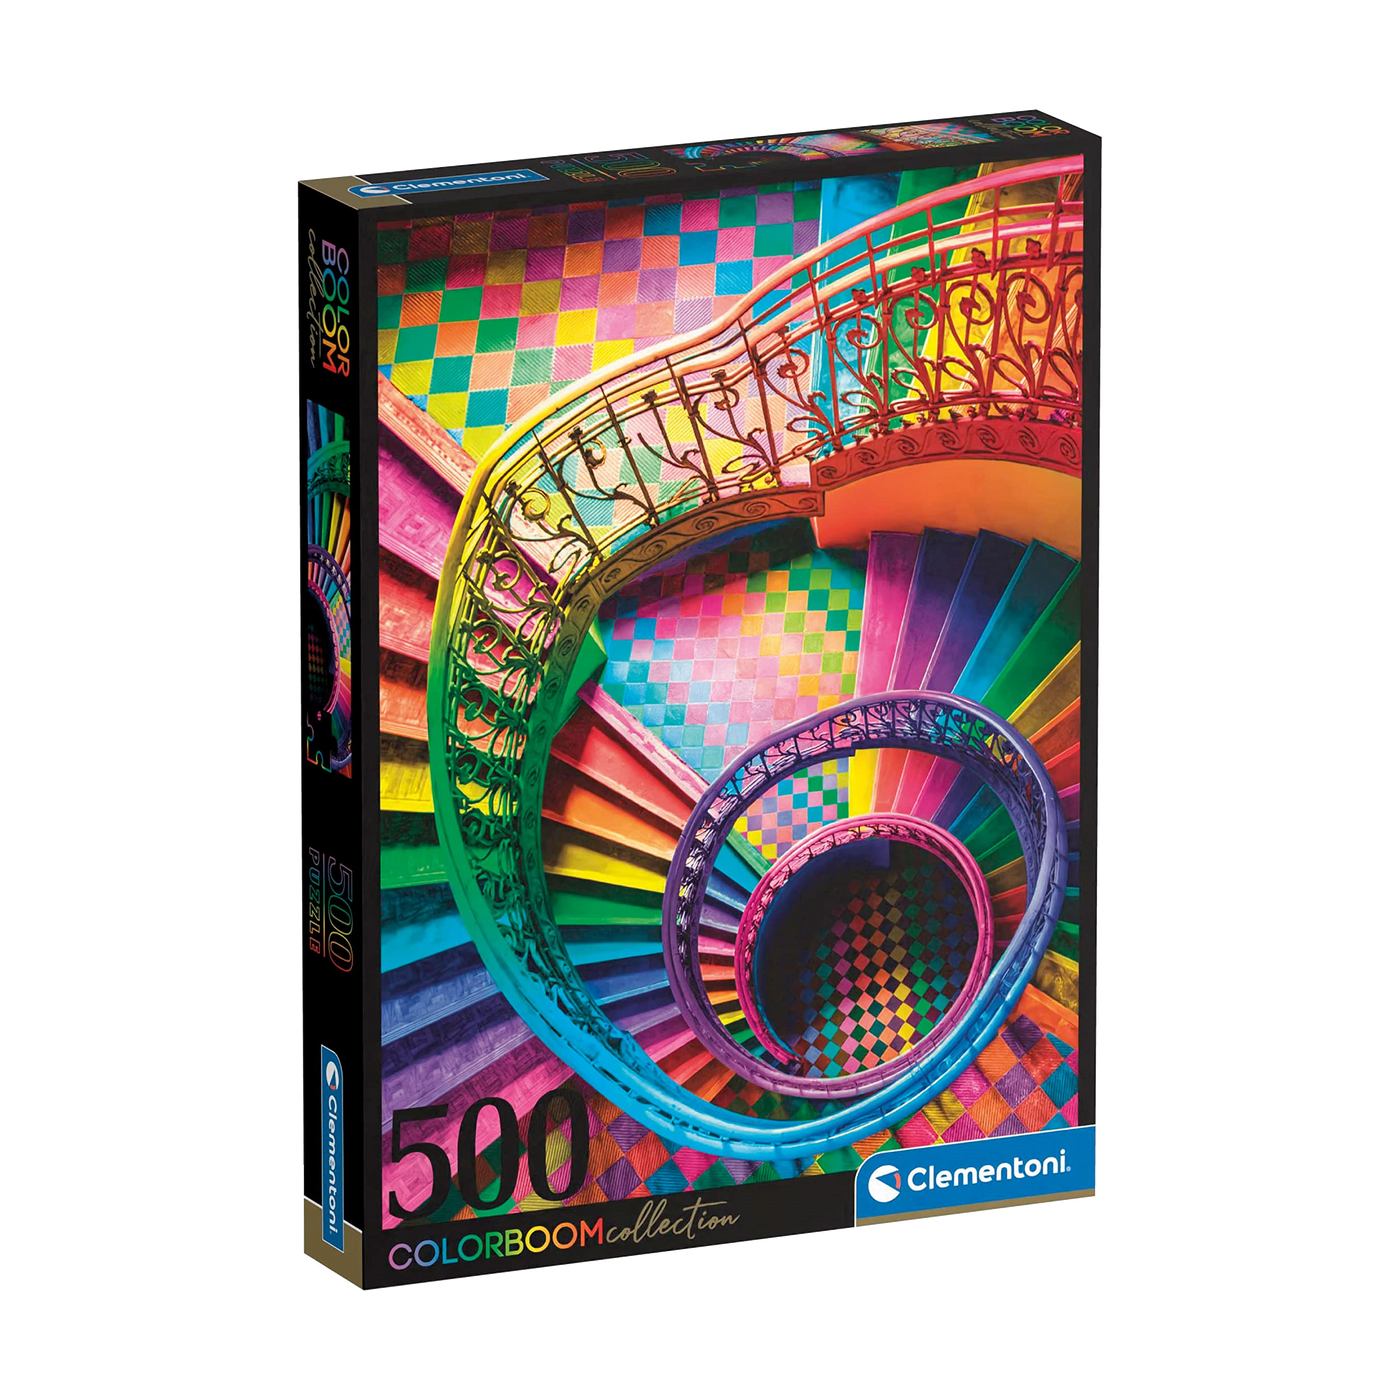 Colorboom Stairs - 500 brikker